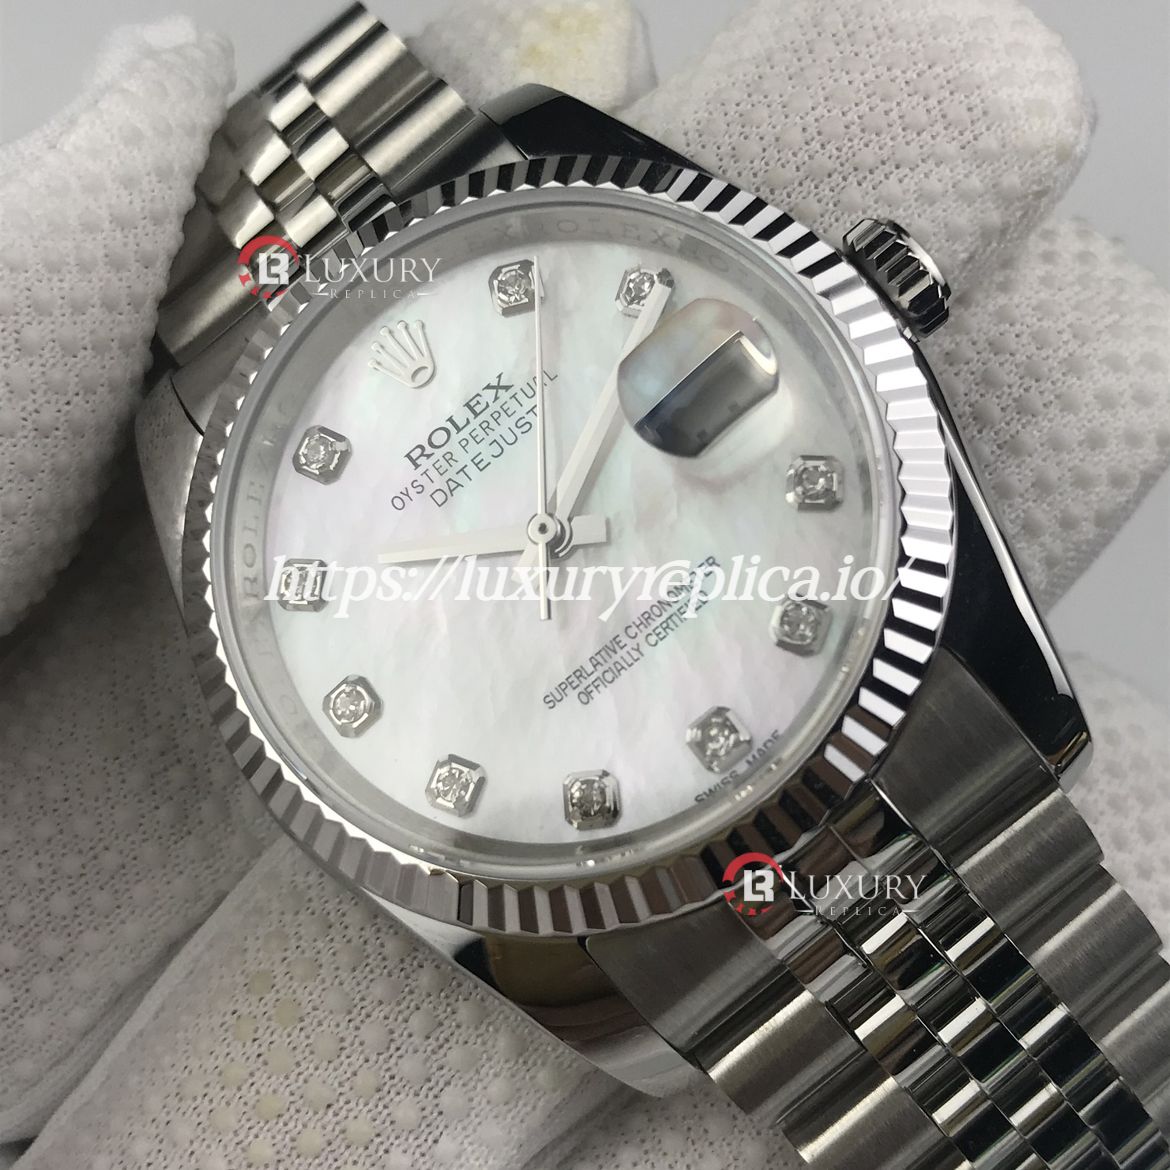 ROLEX DATEJUST 116234 FLUTED BEZEL MOTHER OF PEARL DIAMONDS DIAL